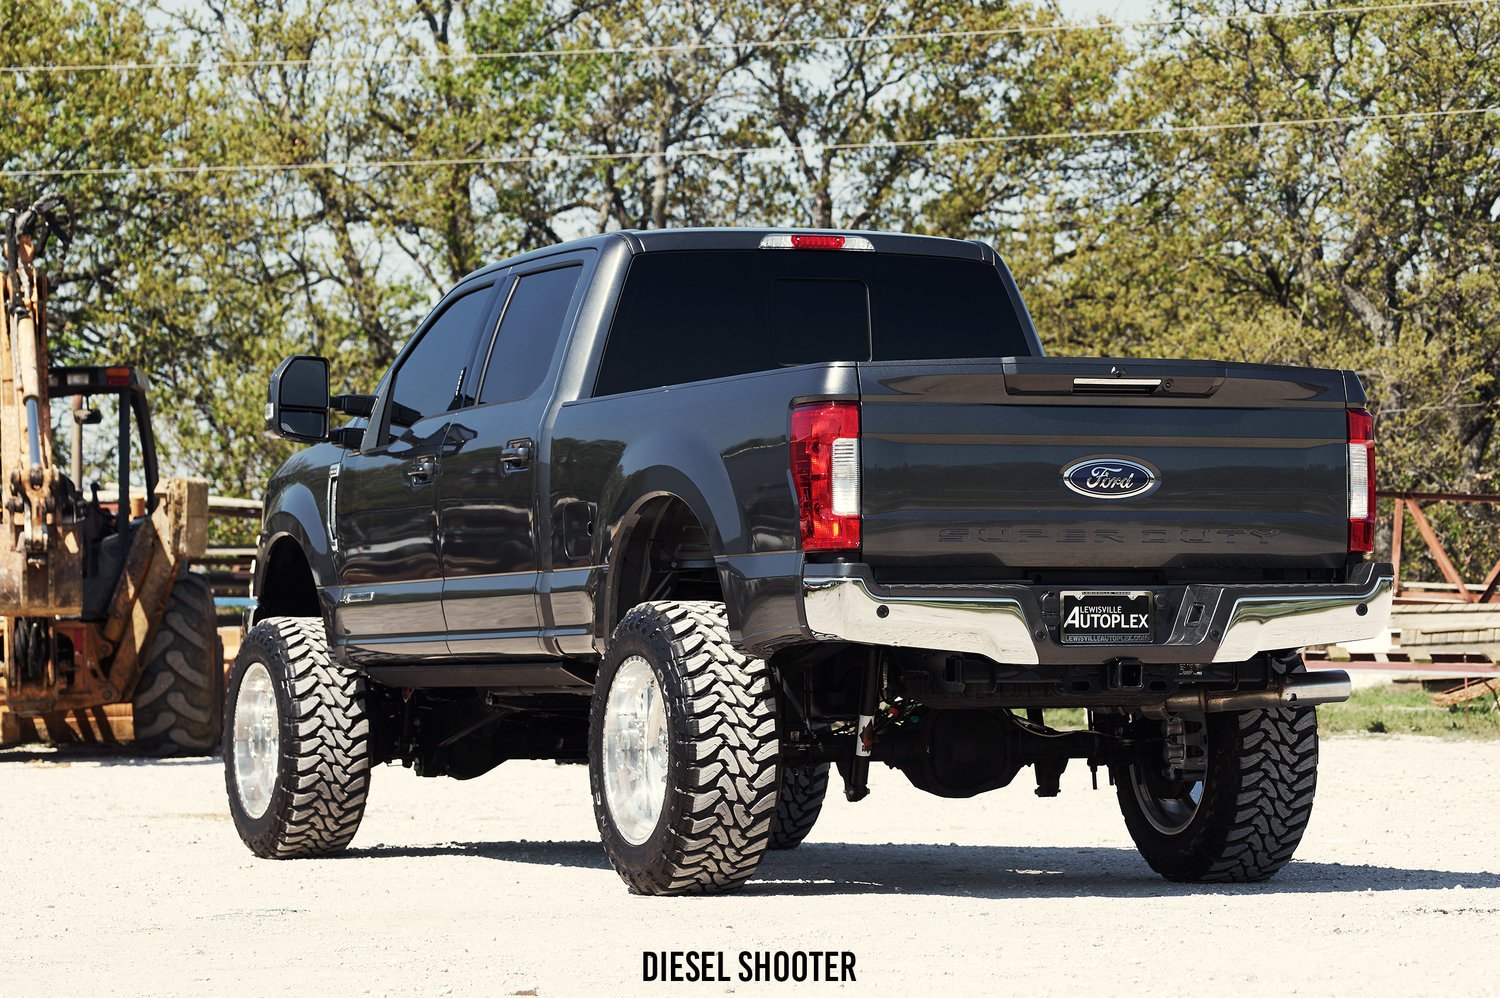 Lifted Ford Powerstroke on Toyo Open Country M/T Tires - Photo by Diesel Shooter